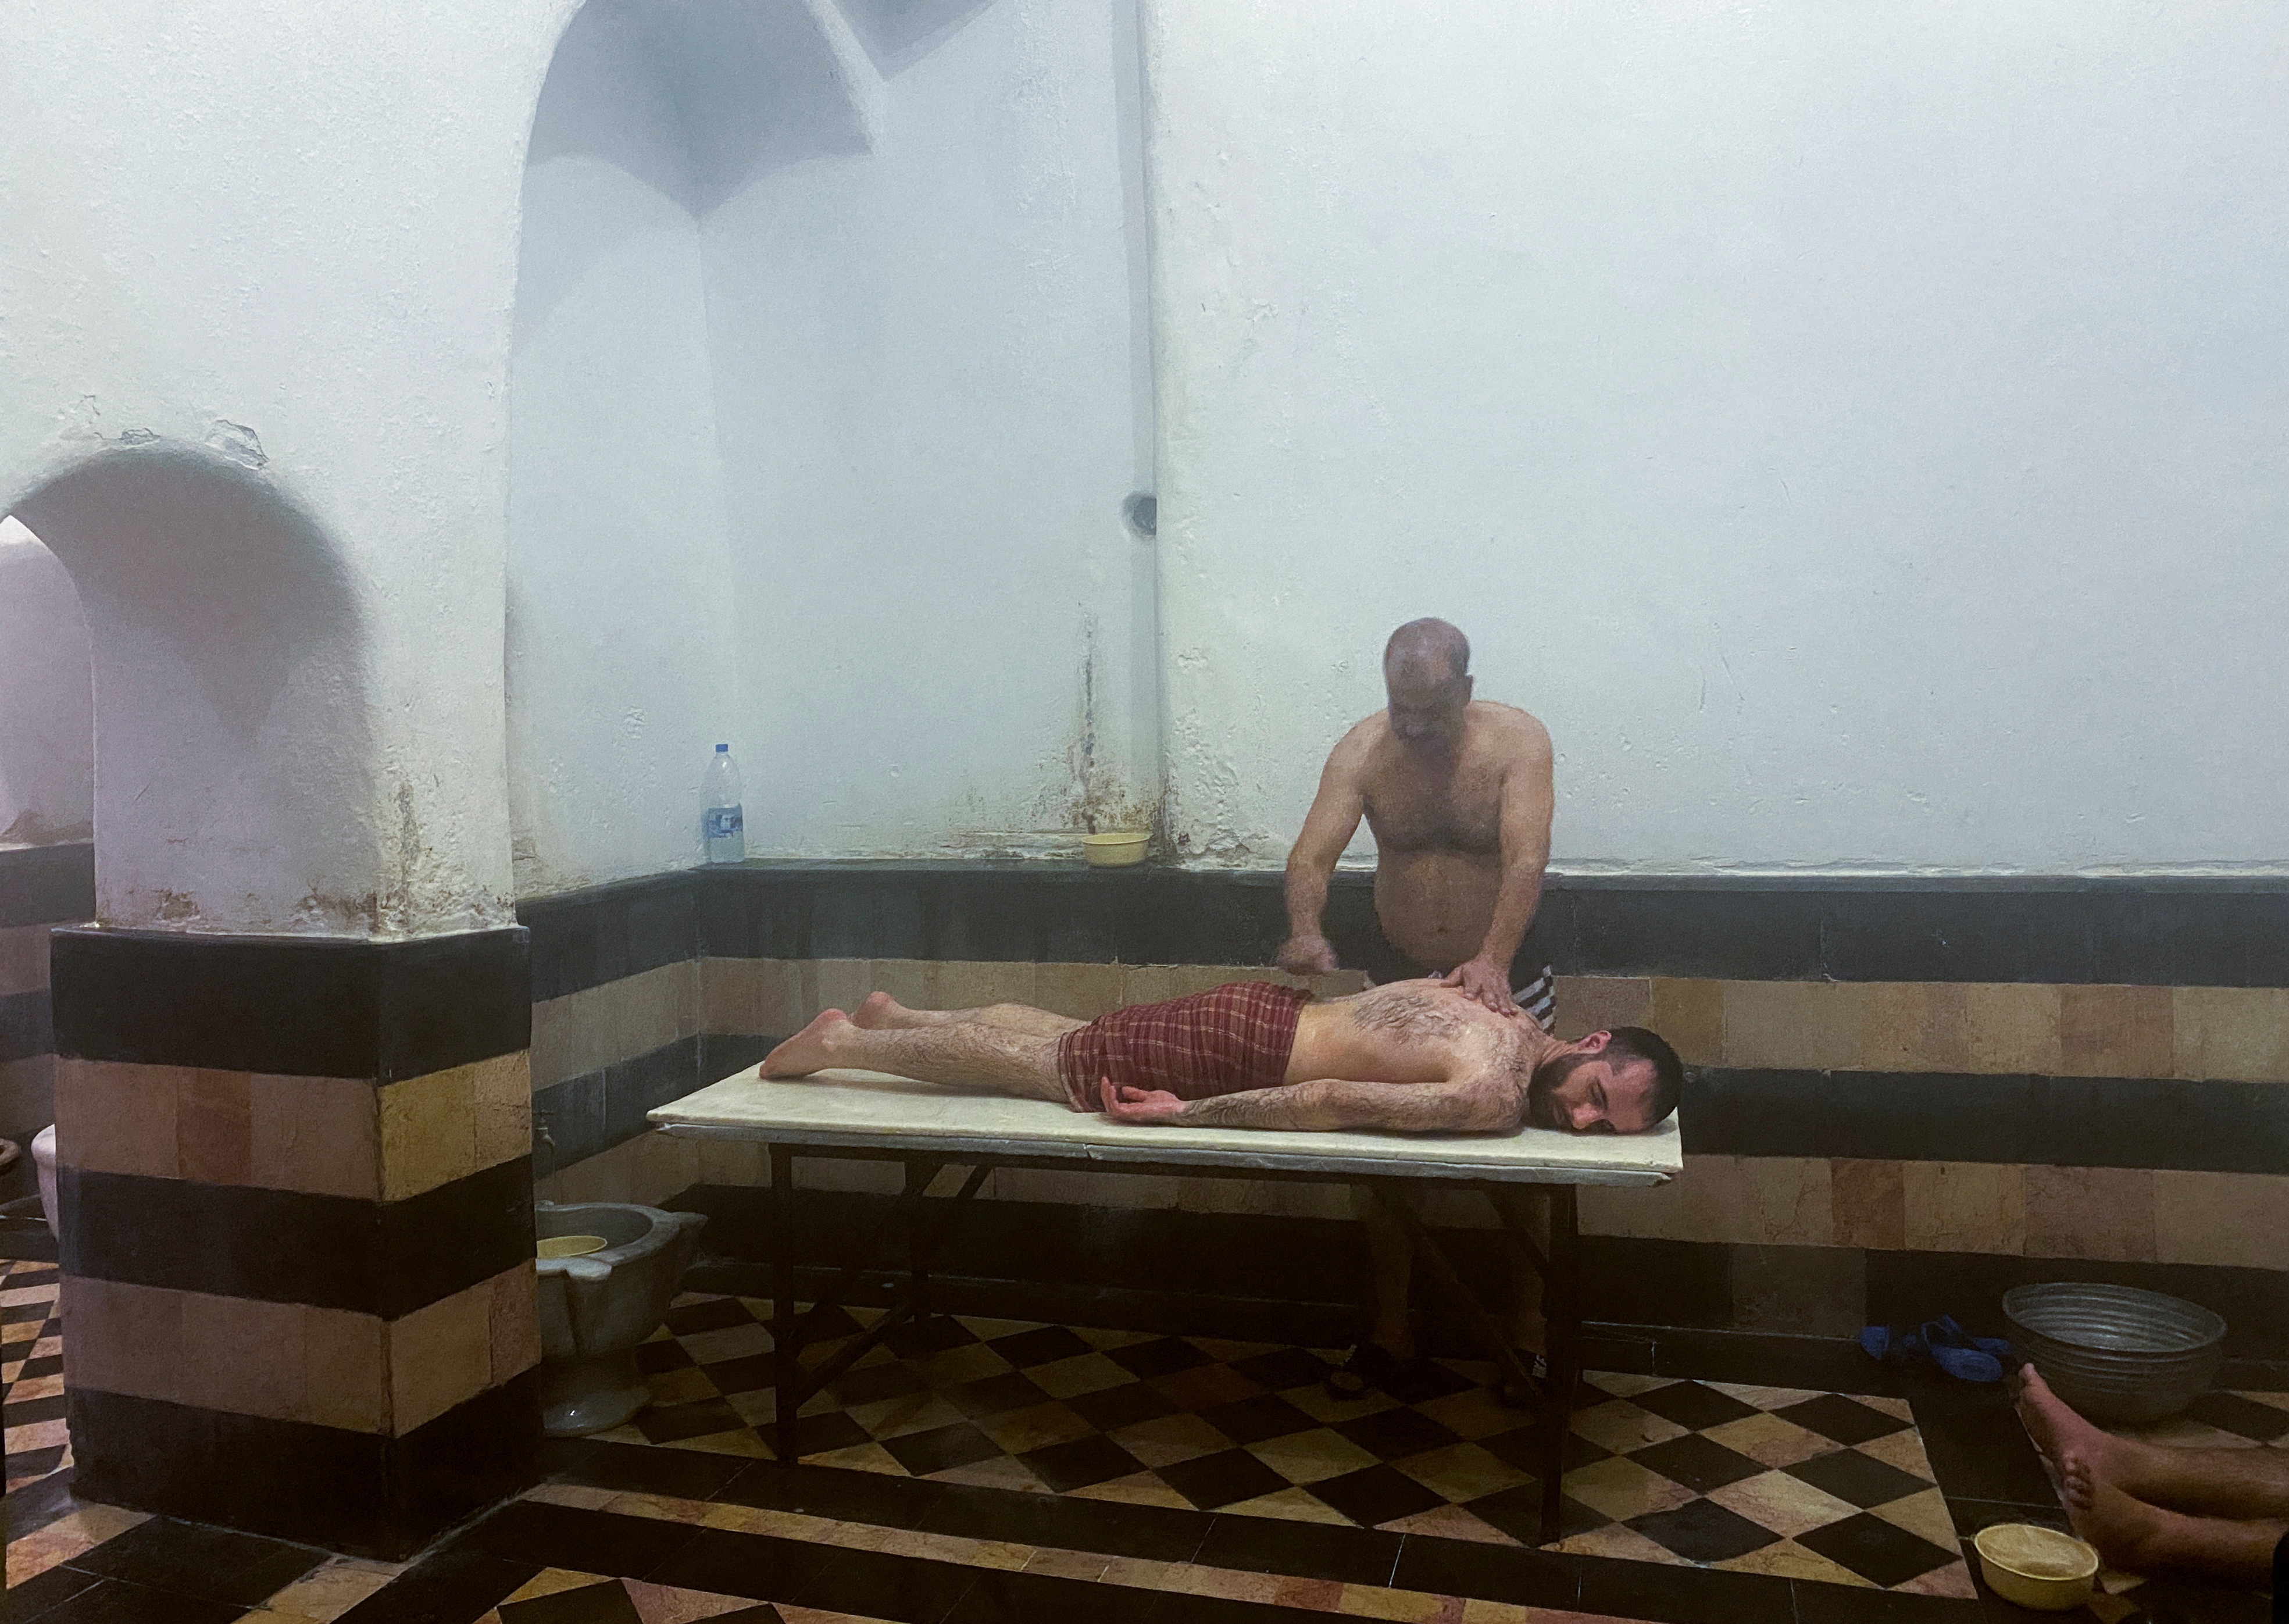 An attendant gives a massage to a customer at a bathhouse in Damascus